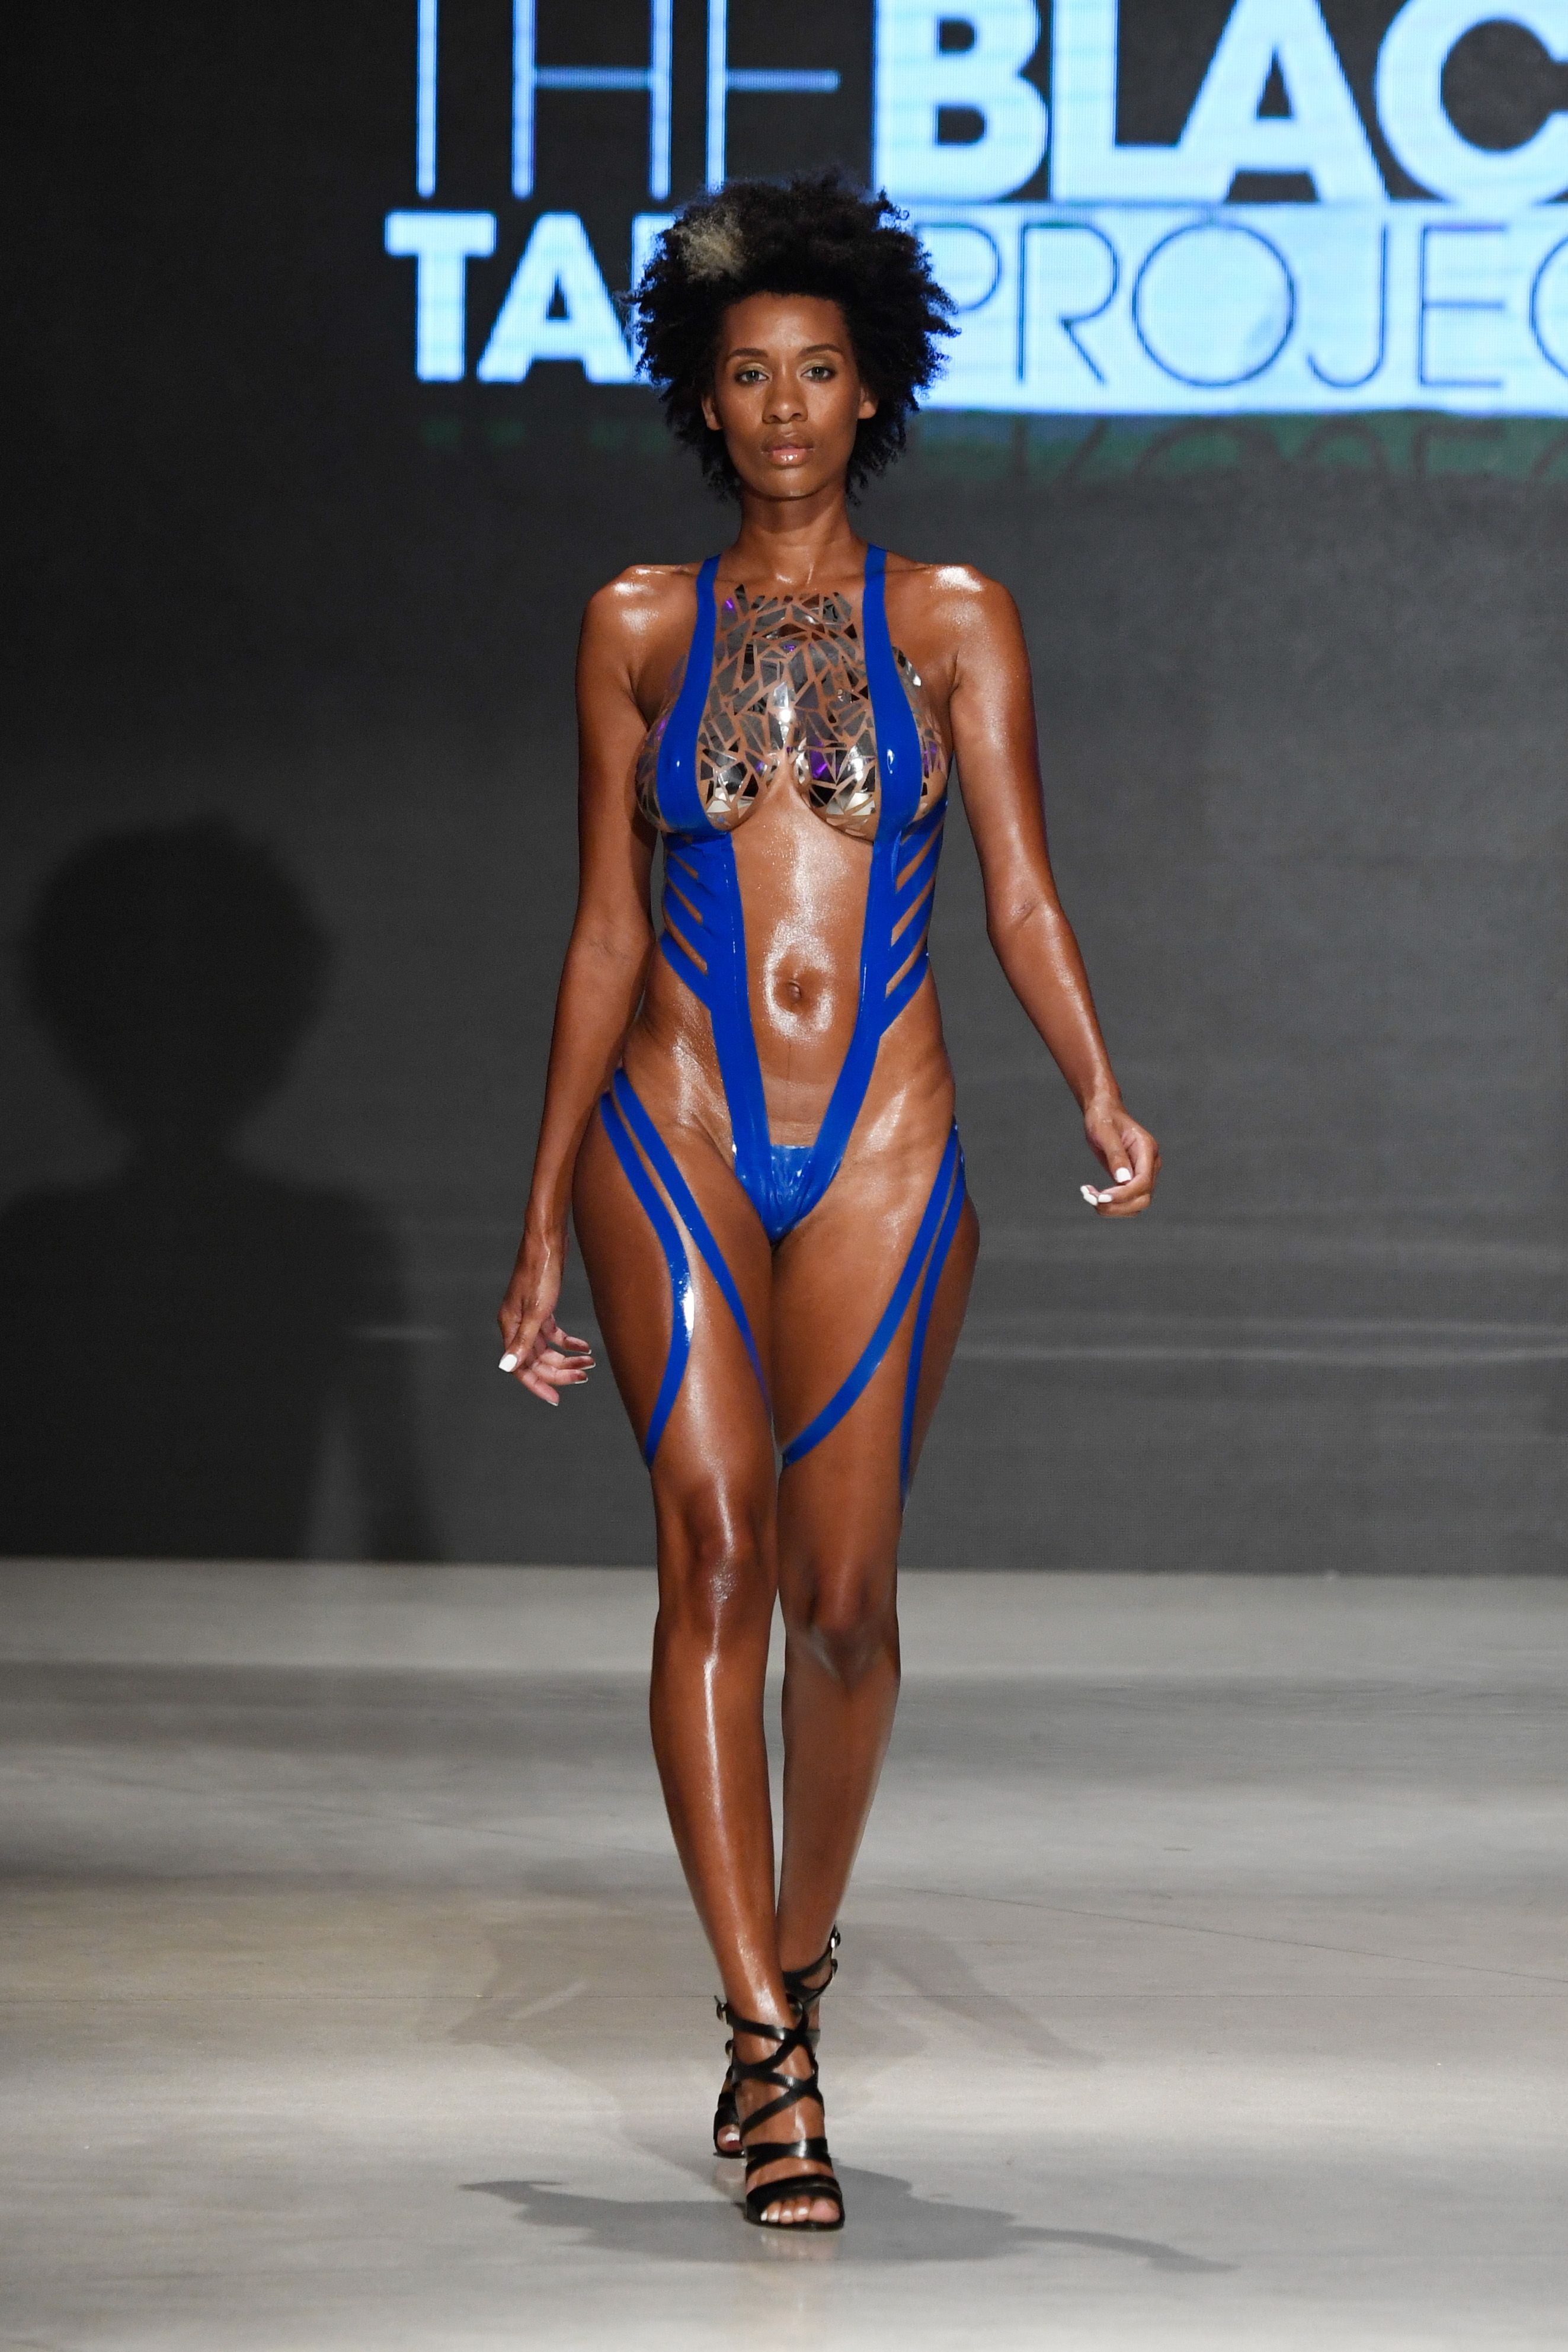 Nearly Naked Metallic Tape Swimsuits Exist - All About the Black Tape  Project Maimi Swim Week Show